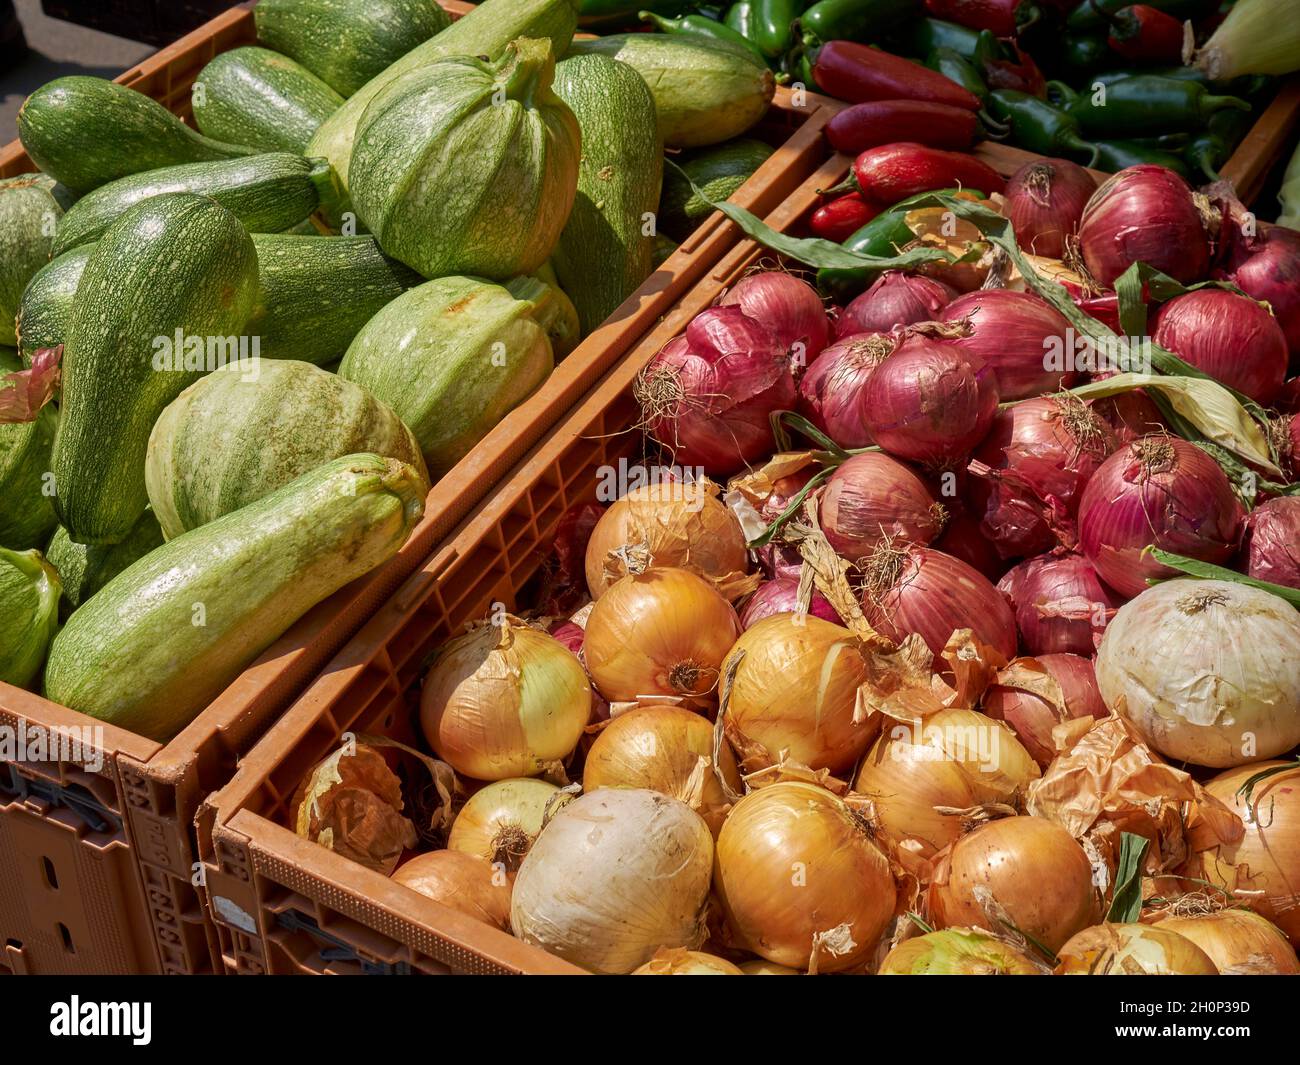 Vegetables on display at the Corona Farmers Market, Queens, New York City, NY, USA Stock Photo